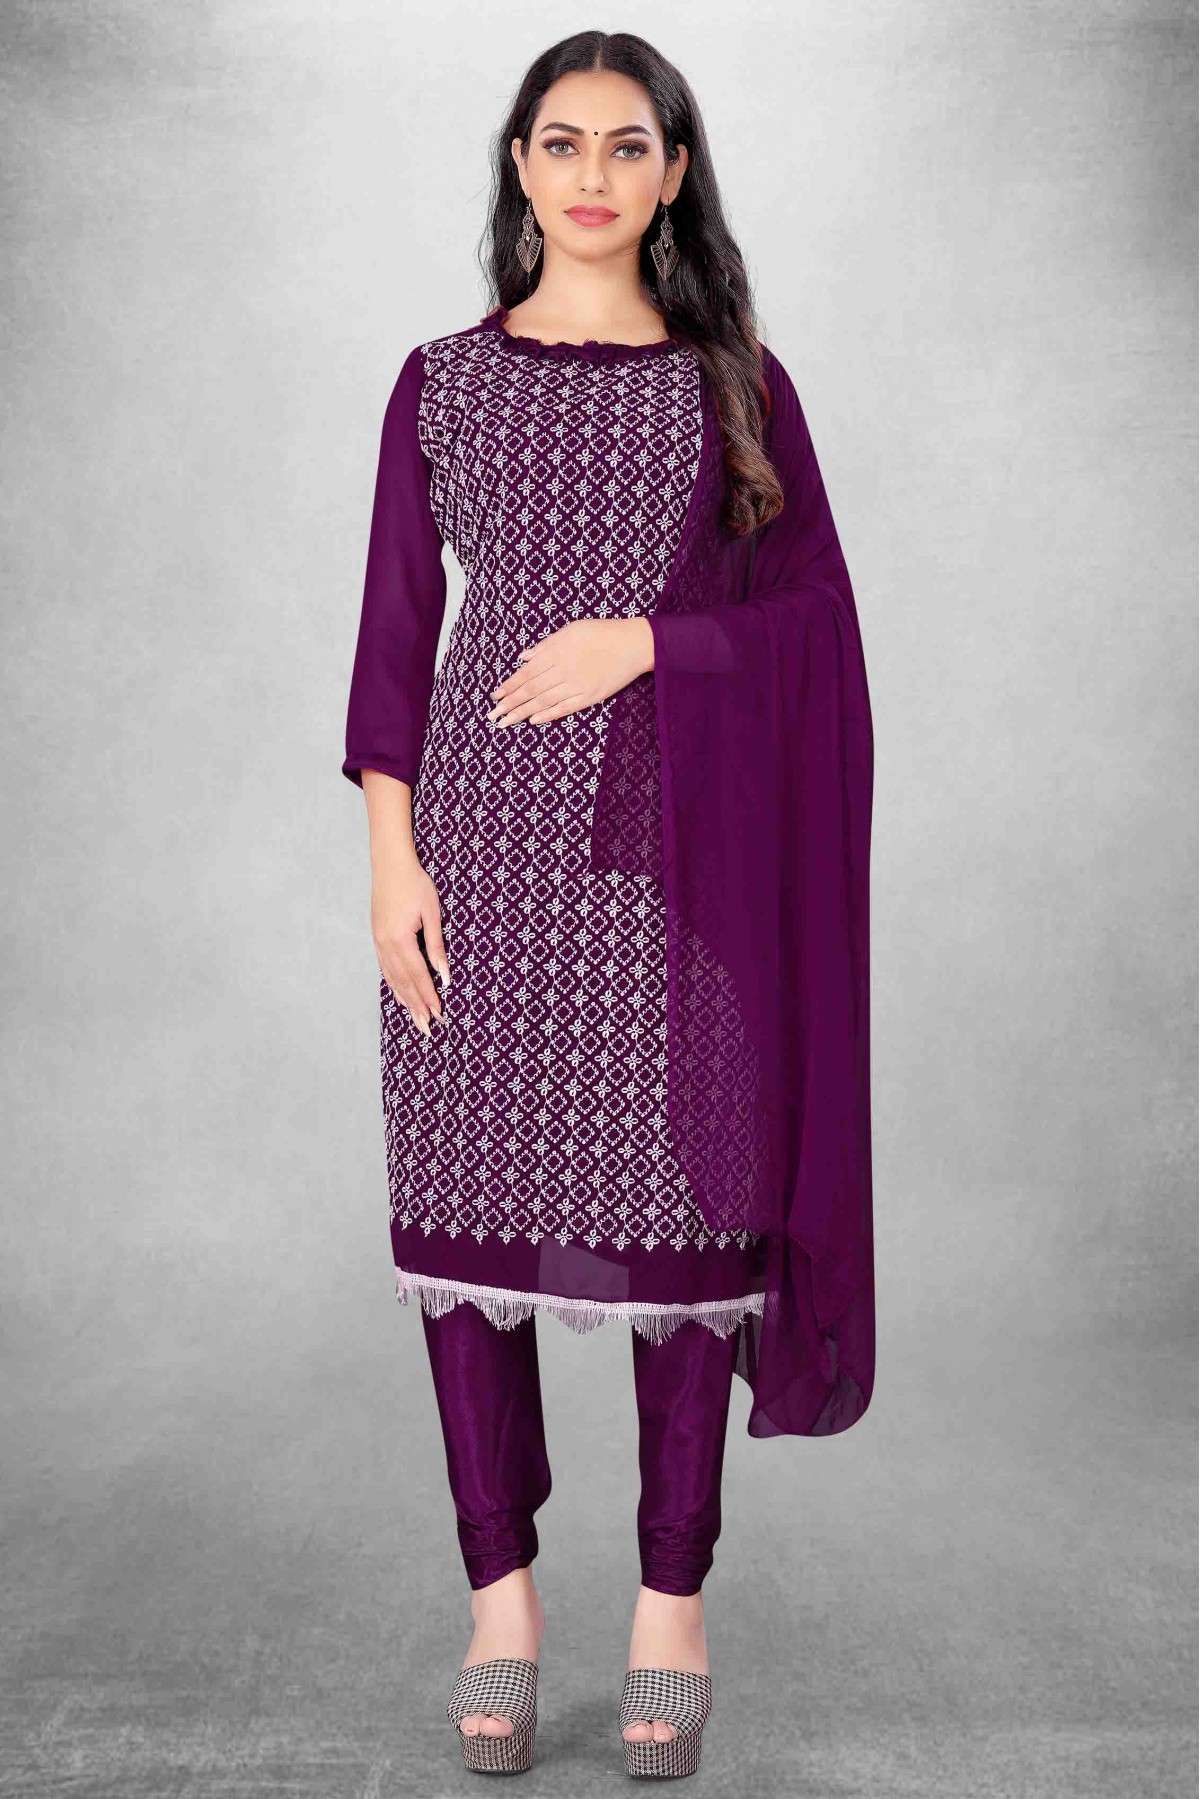 Unstitched Georgette Embroidery Churidar Suit In Purple Colour - US3234486